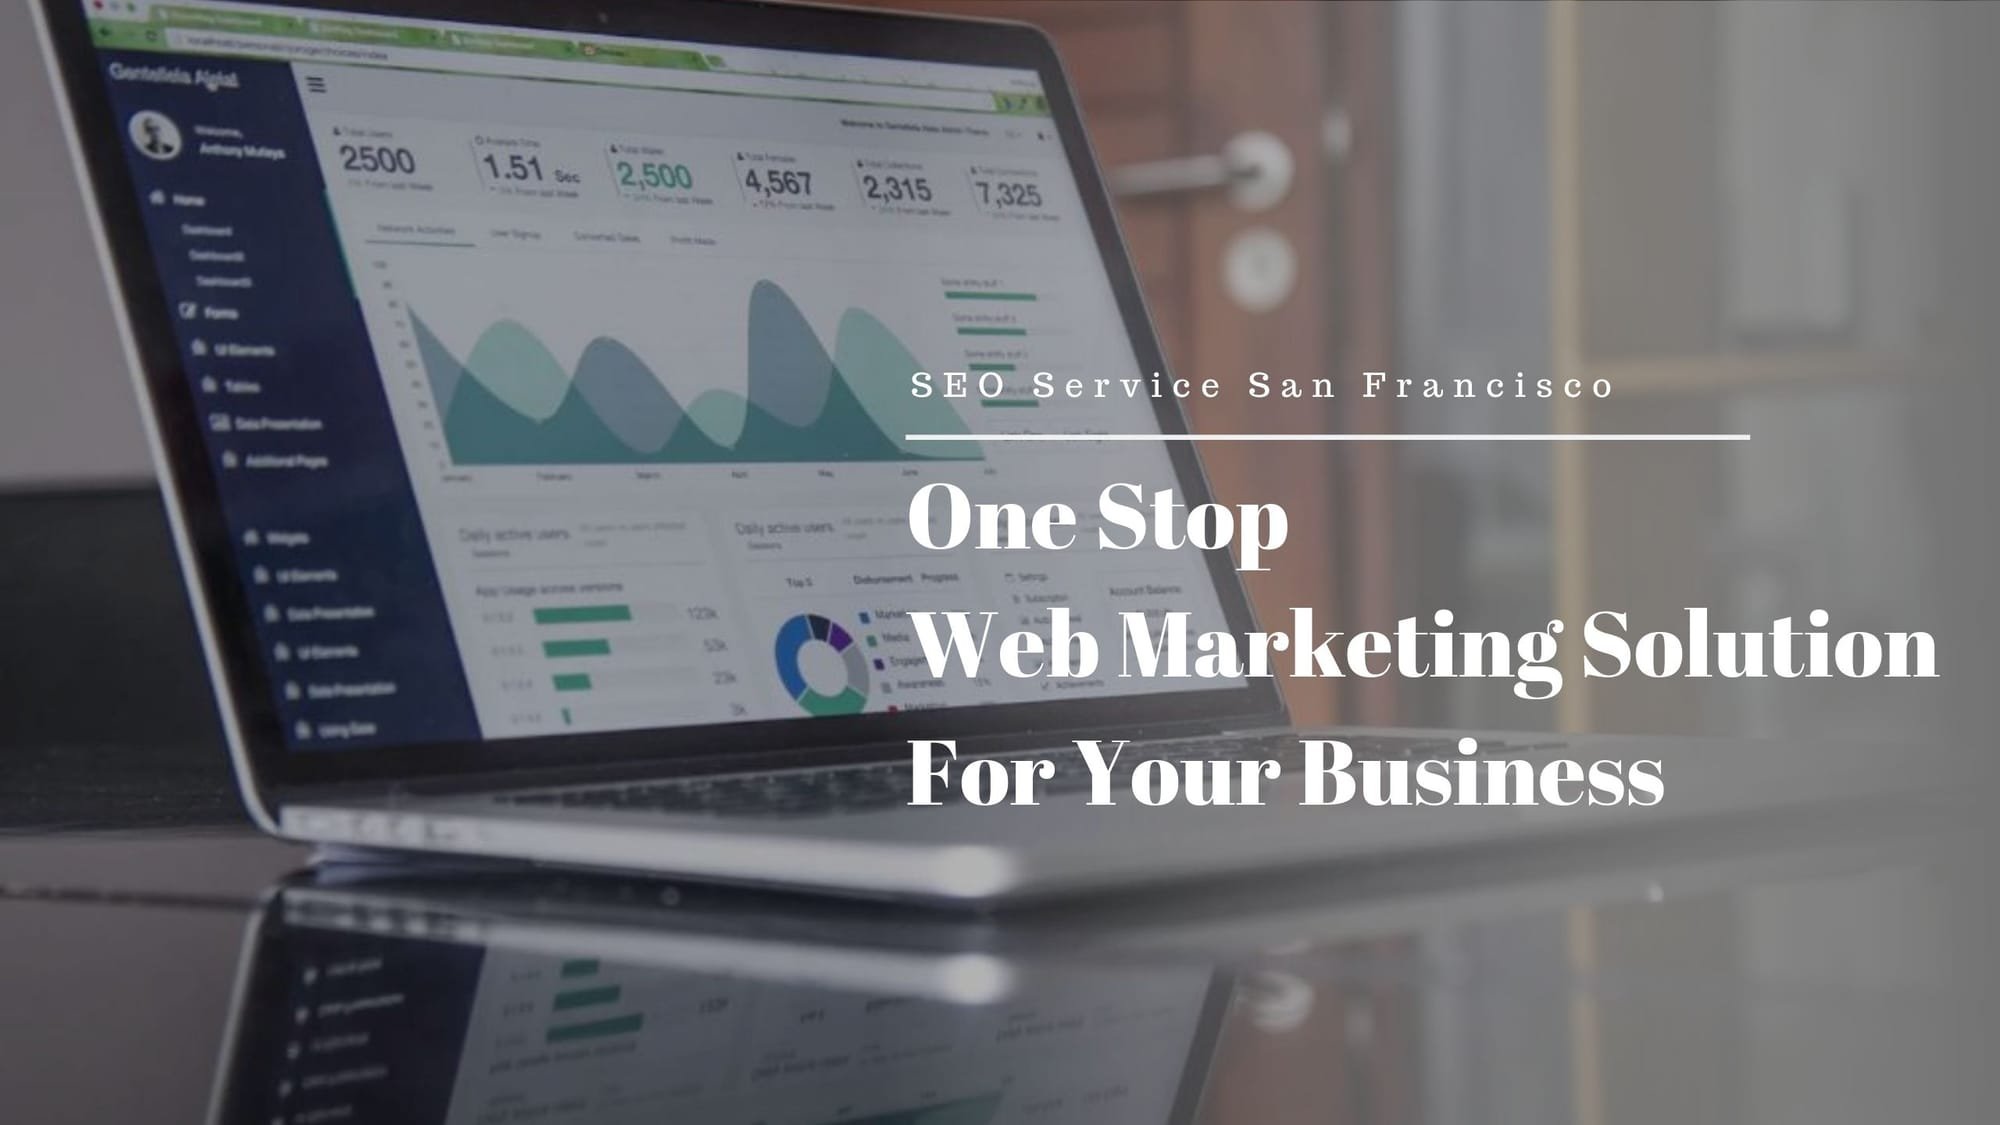 SEO Service San Francisco - One Stop Web Marketing Solution For Your Business